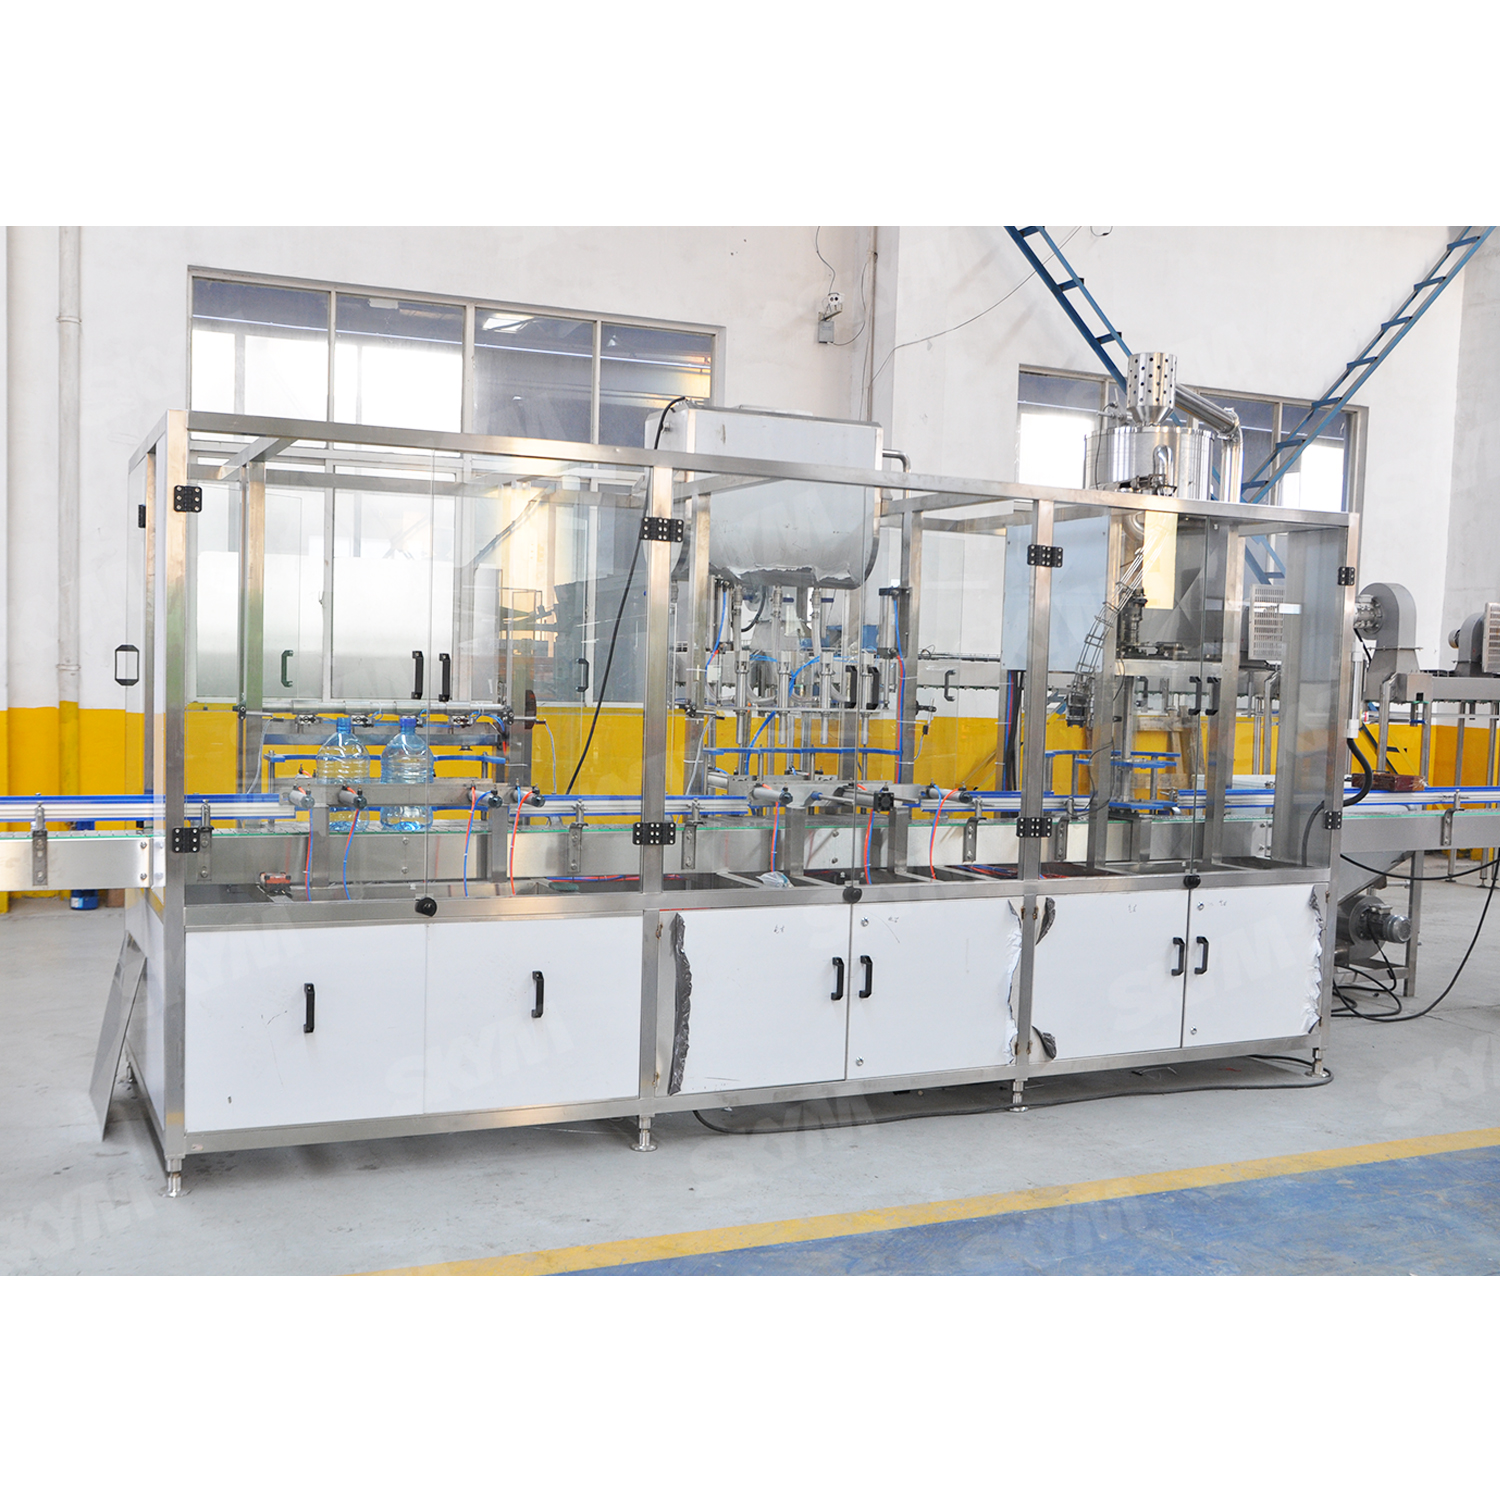 4000BPH 5L Pure Water Linear Type Filling Machine